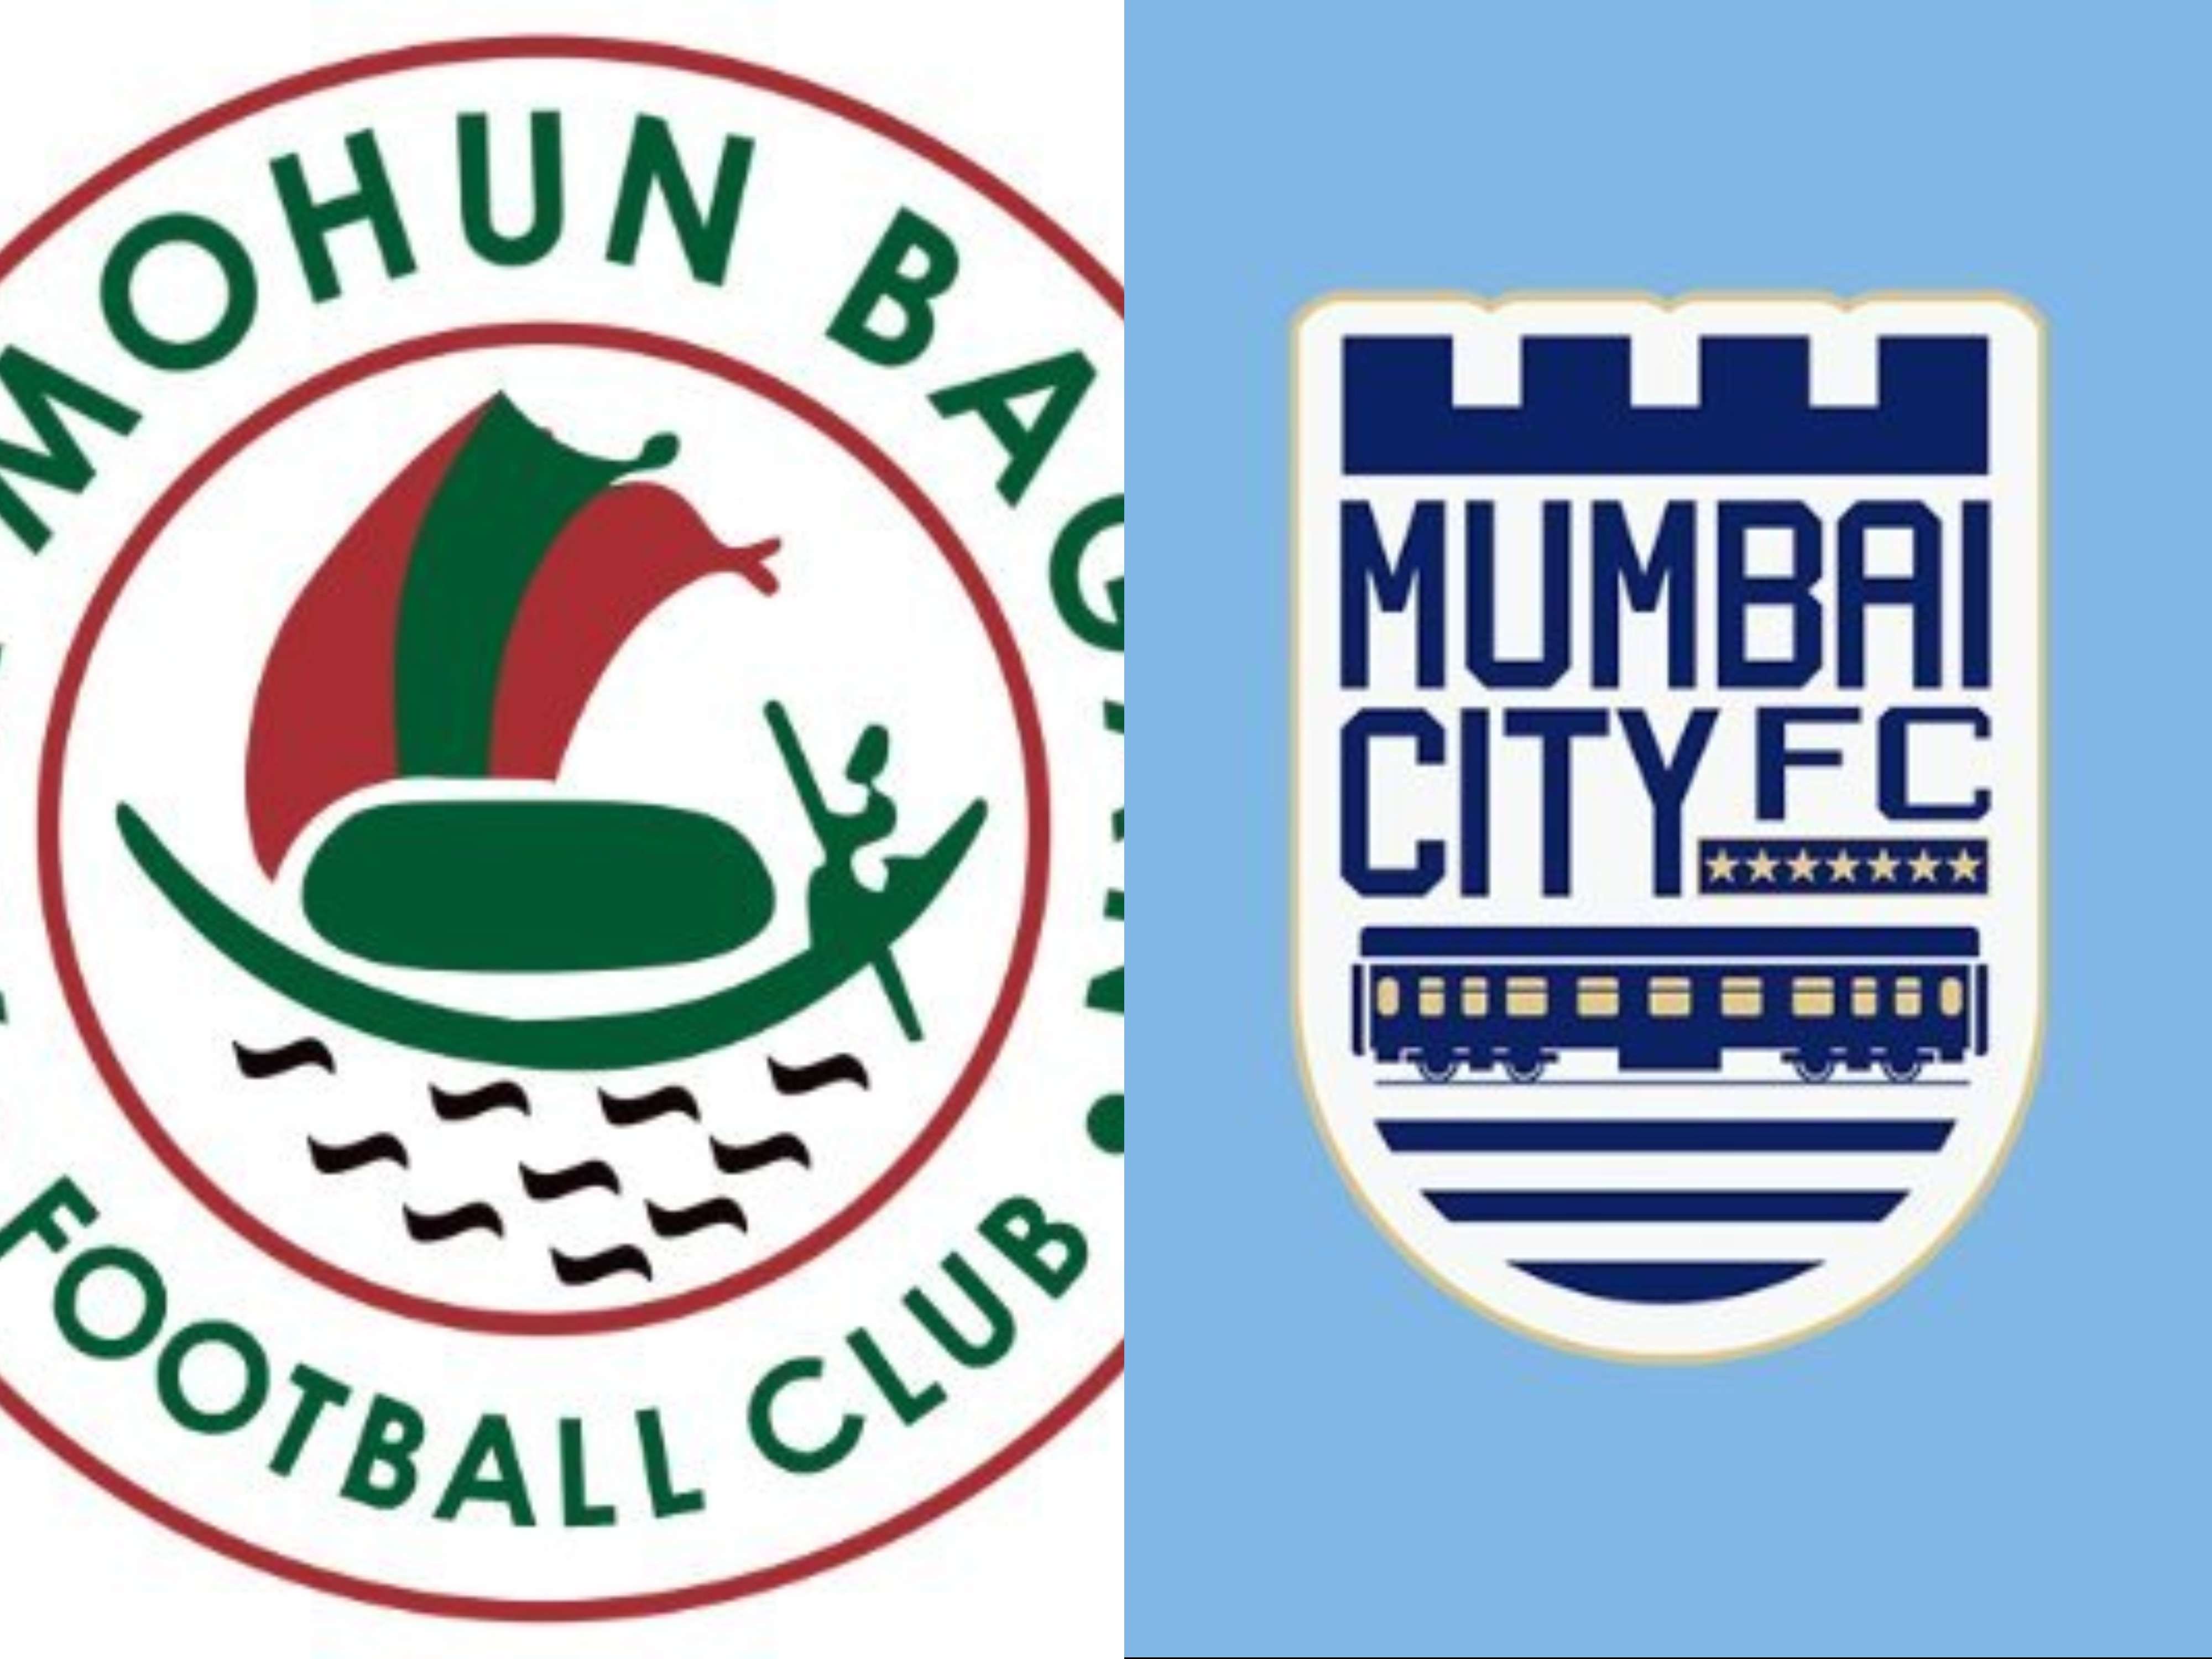 There’s little doubt that Mumbai City FC and ATK Mohun Bagan have been in a league of their own in this season of the ISL